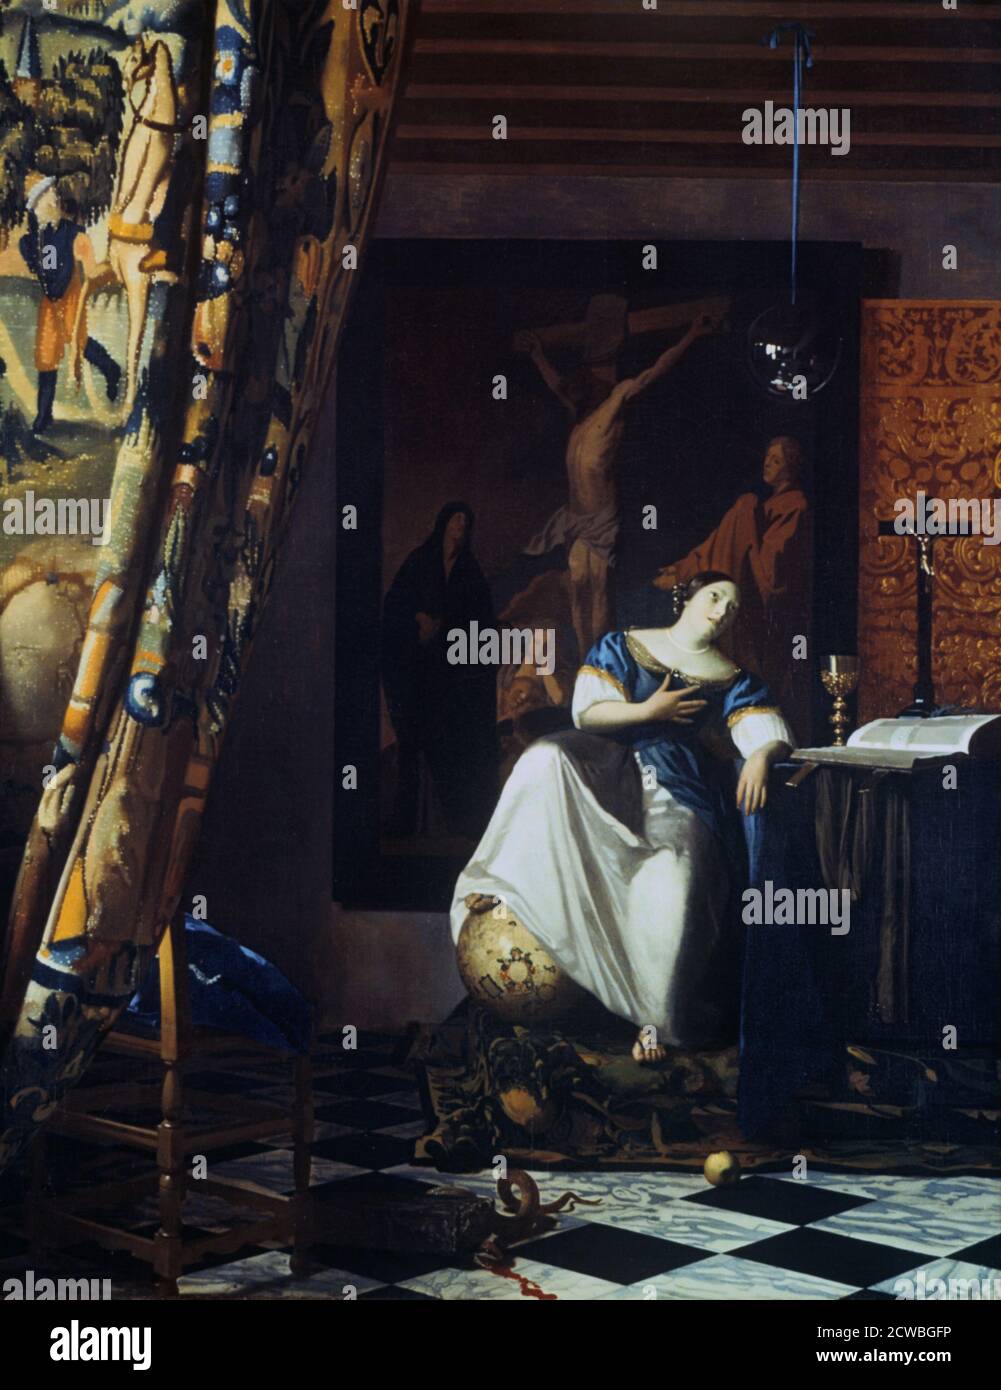 Allegory of the Faith' by Jan Vermeer, c1670. Vermeer's source derives from a standard handbook of iconography, Cesare Ripa's Iconologia. Vermeer interpreted Ripa's description of Faith with 'the world at her feet' literally, showing a Dutch globe published in 1618. The divine world is rendered as a glass sphere reflecting the room. The painting of the Crucifixion on the wall copies a work by Jacob Jordaens. Among the many Christological symbols, the most prominent are the apple, emblem of the first sin, and the serpent (Satan) crushed by a stone (Christ, the 'cornerstone' of the Church). Dati Stock Photo